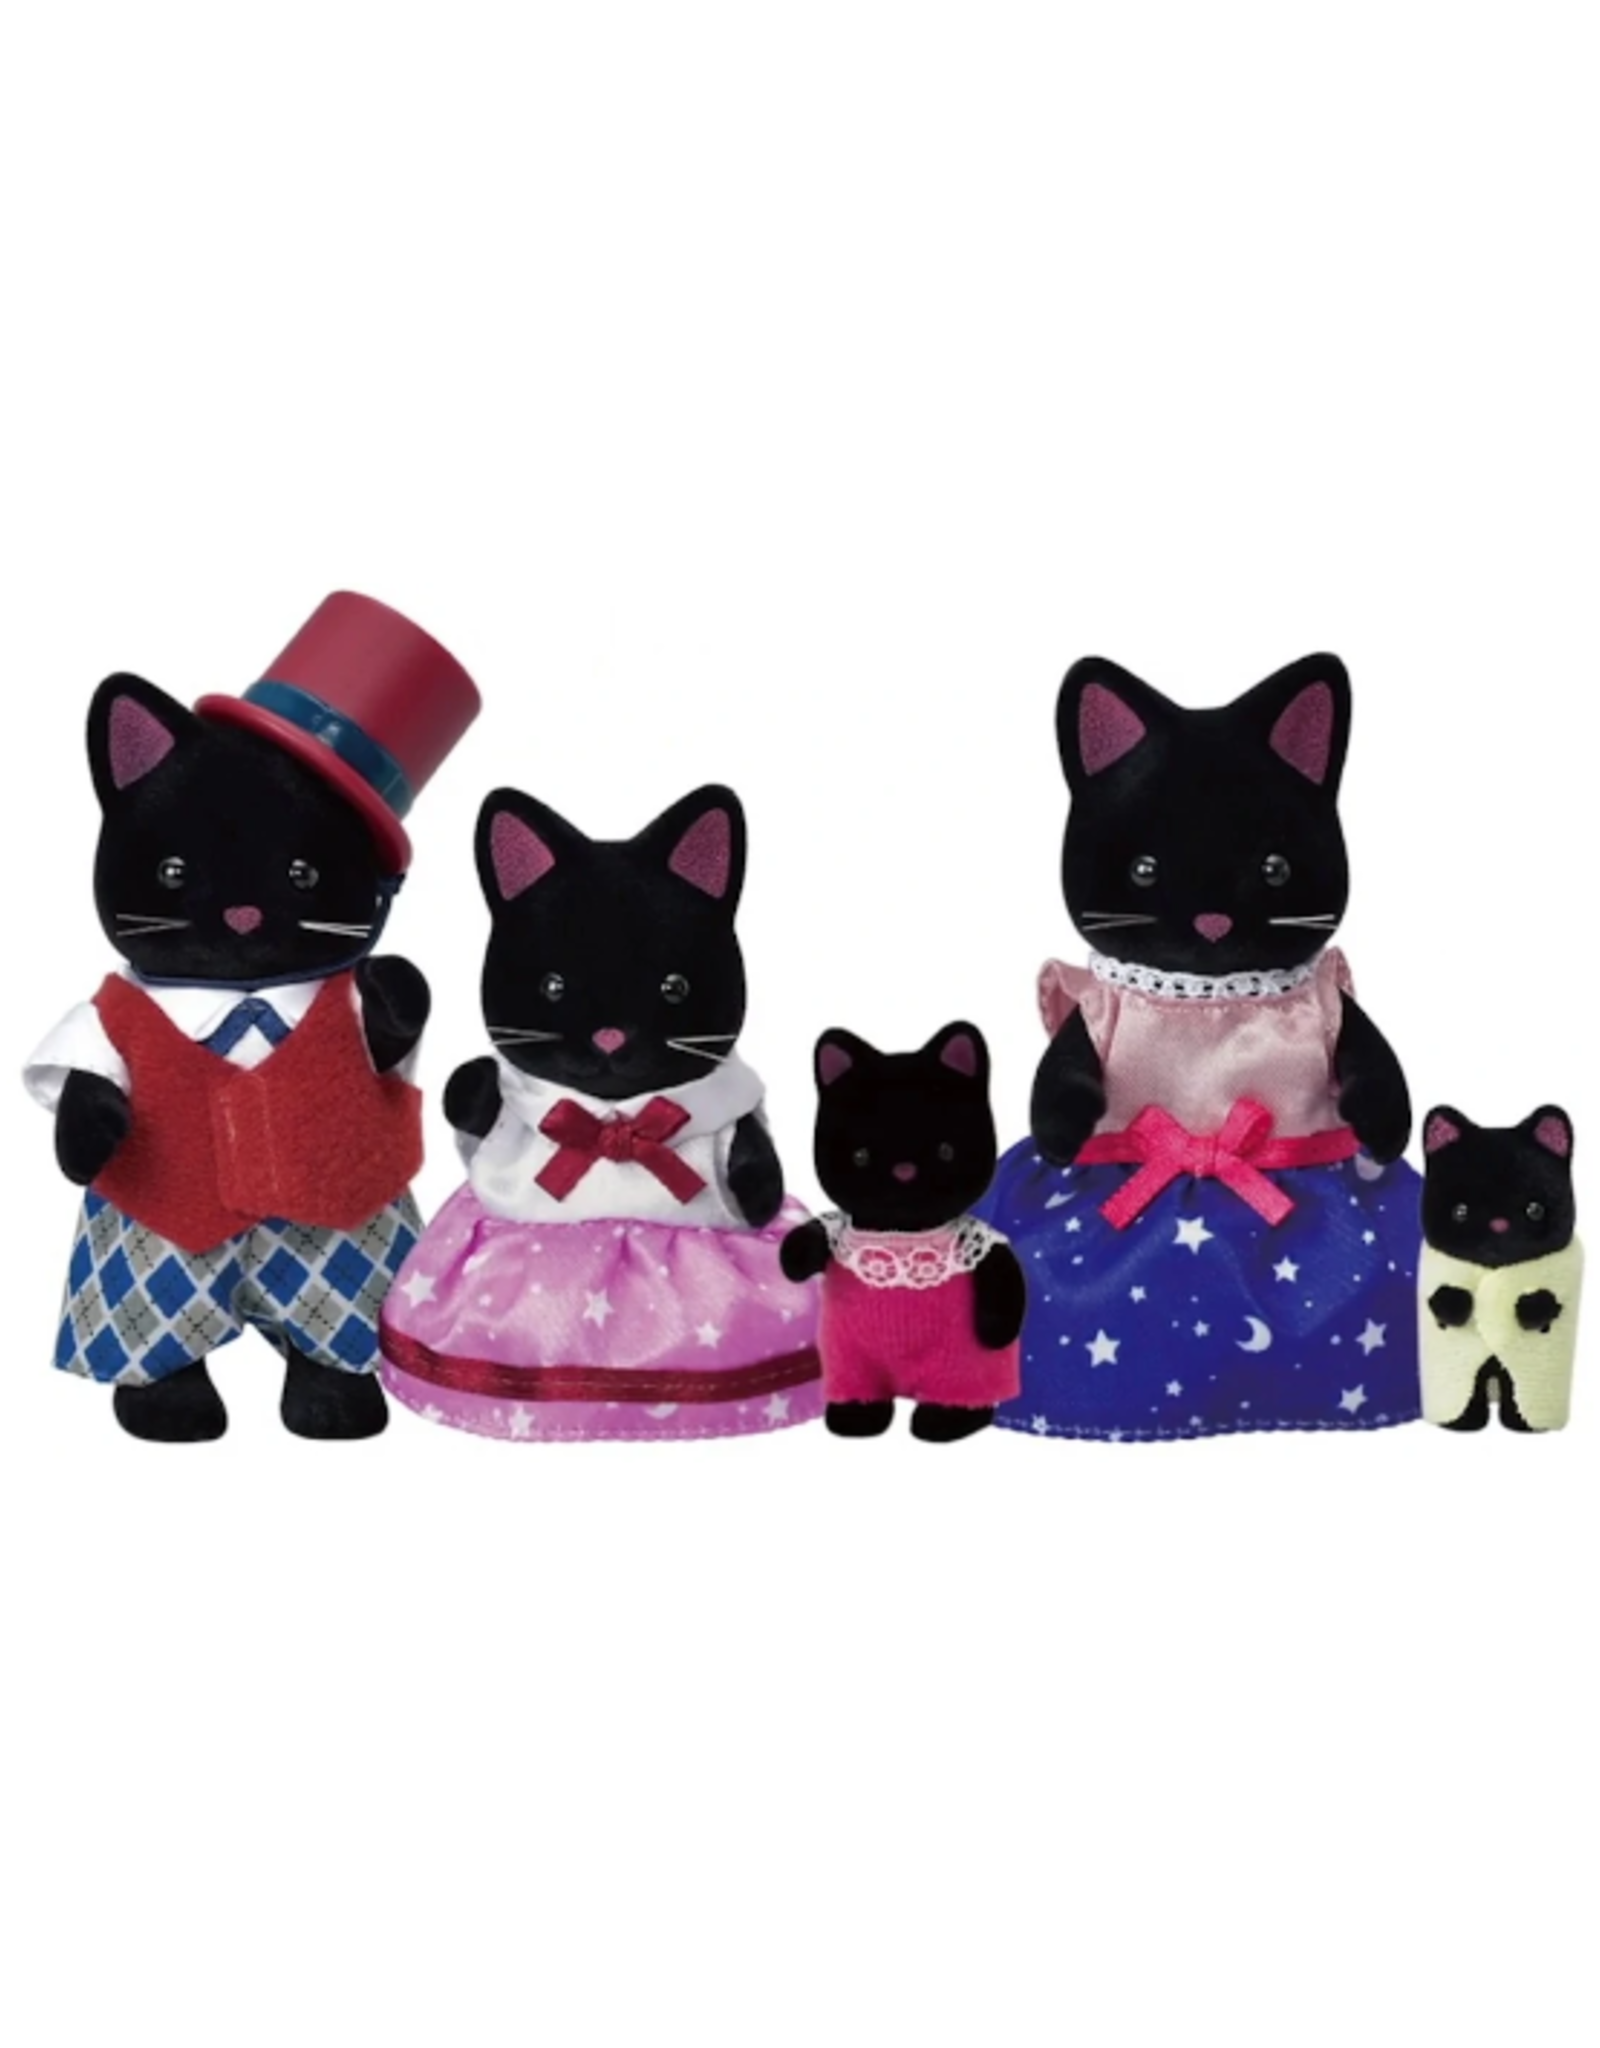 Calico Critters Calico Critters - Midnight Cat Family